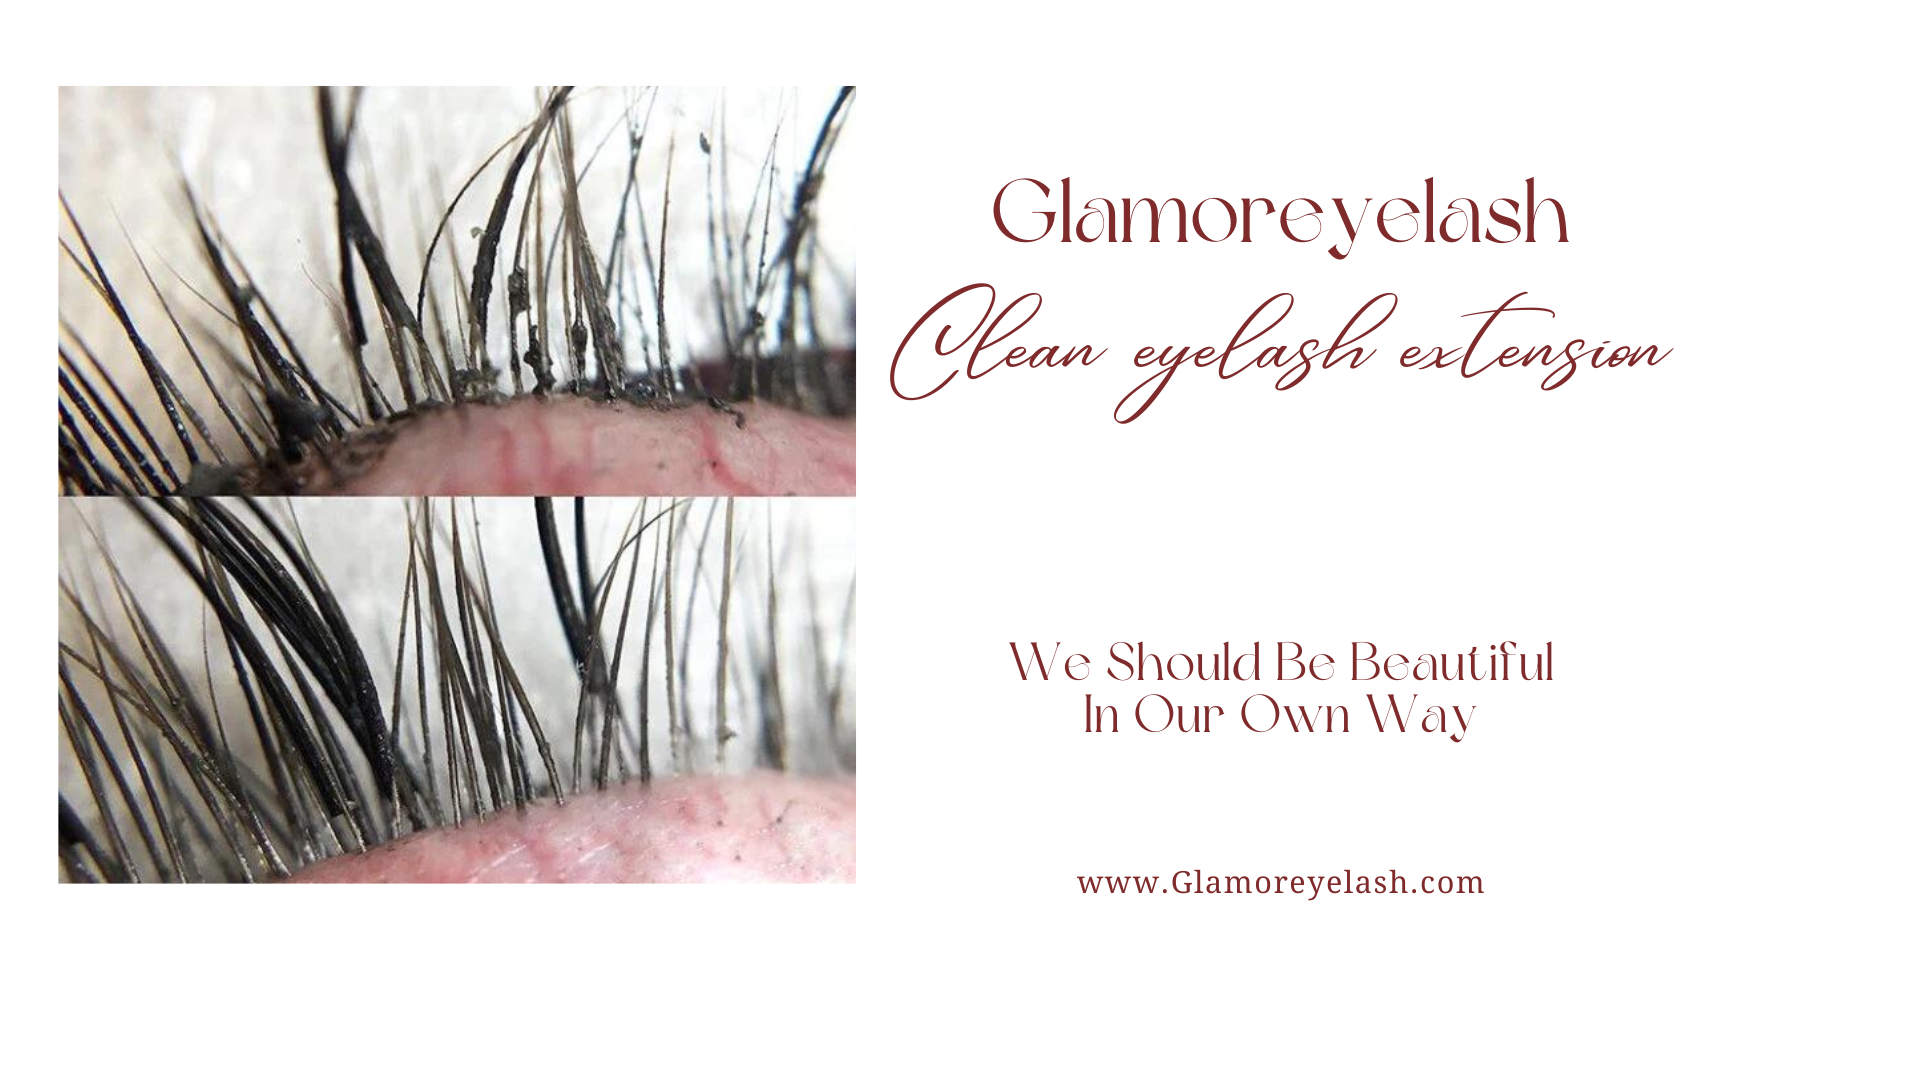 Guide to clean eyelash extensions at home